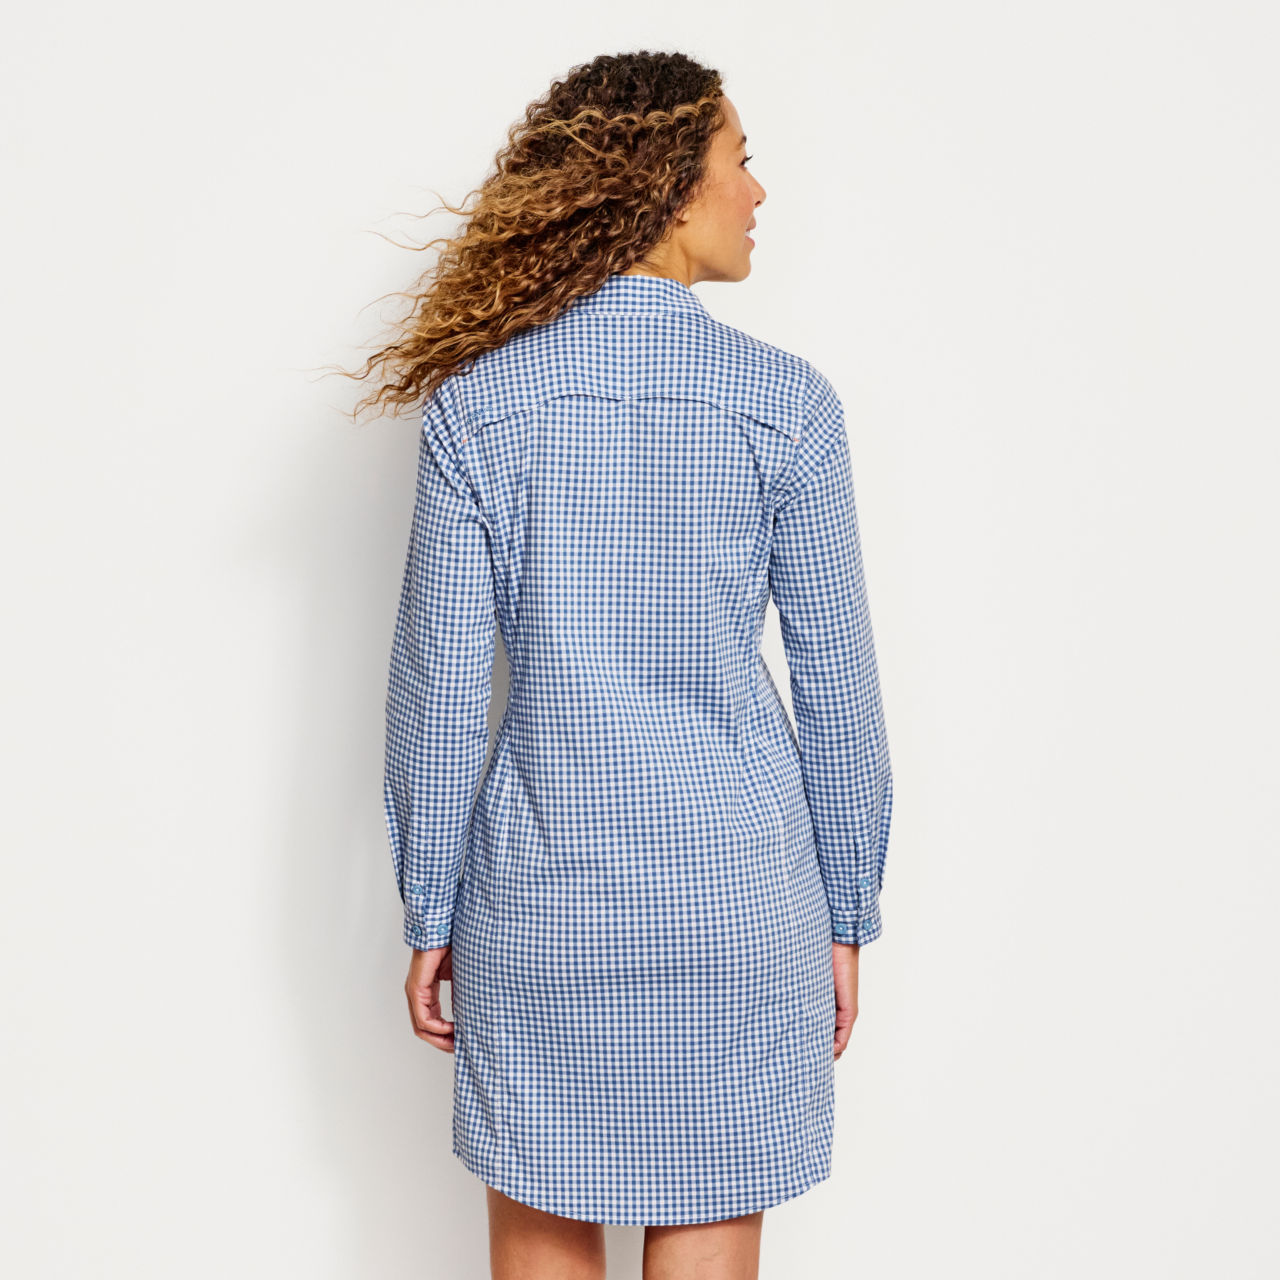 River Guide Long-Sleeved Dress - DUSTY BLUE CHECK image number 3